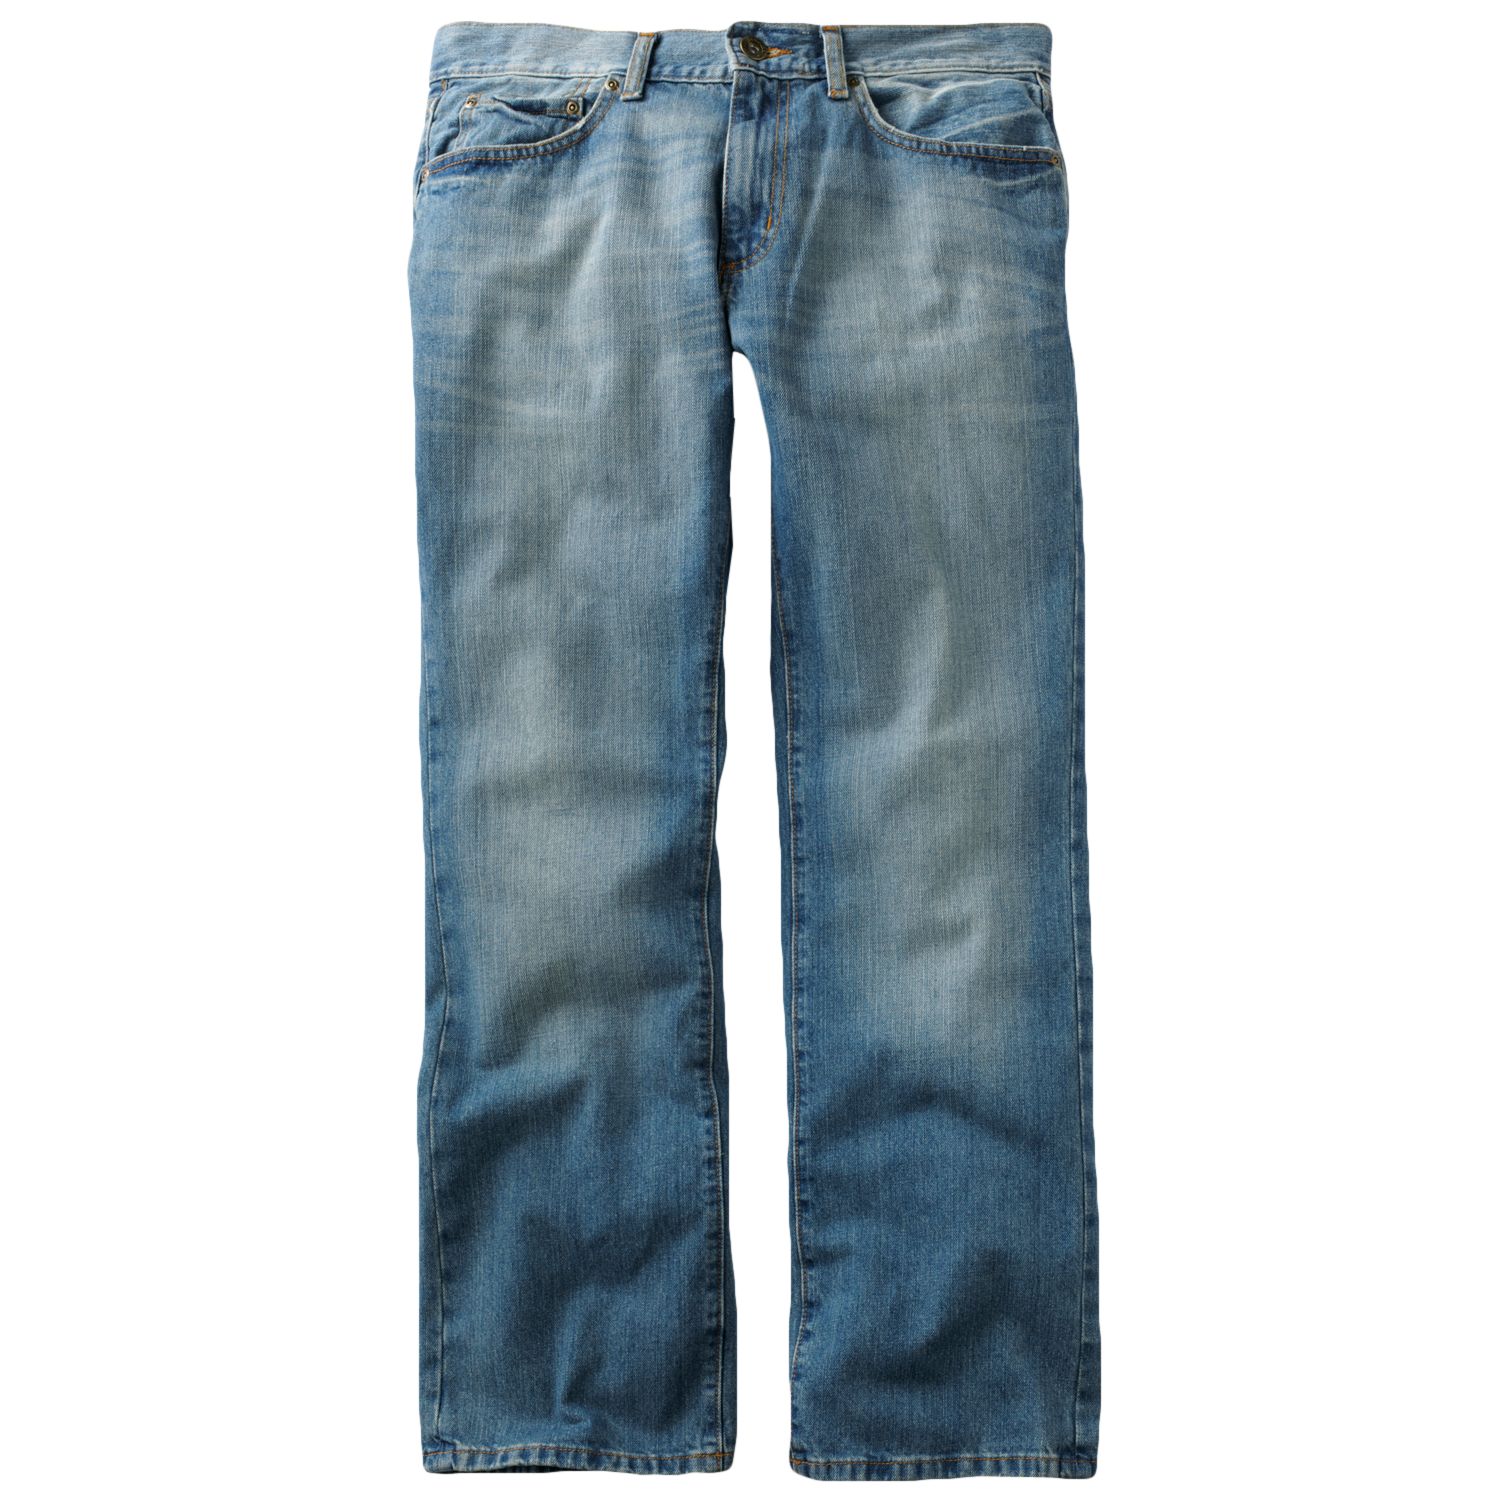 sonoma life style jeans mens